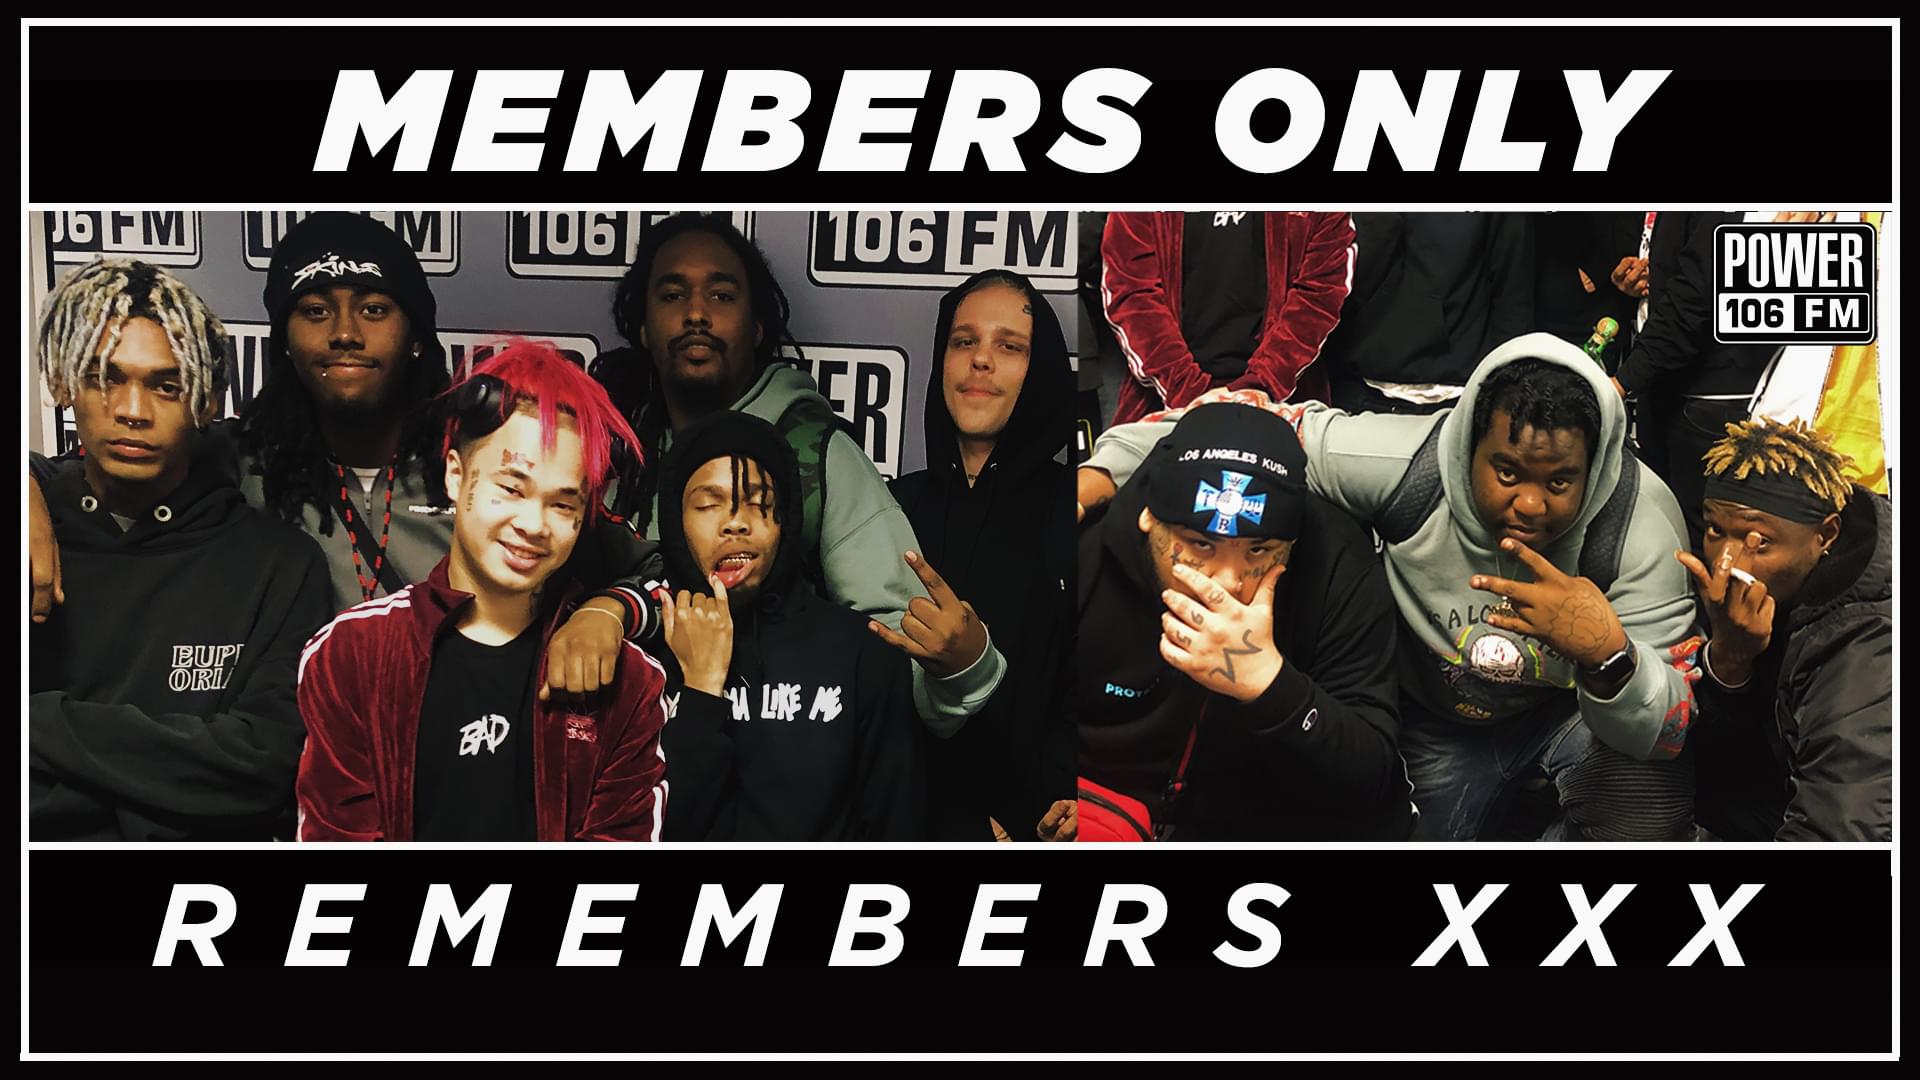 Members Only Share Favorite Memories with XXXTentacion + Best Part Of Making Vol. 4